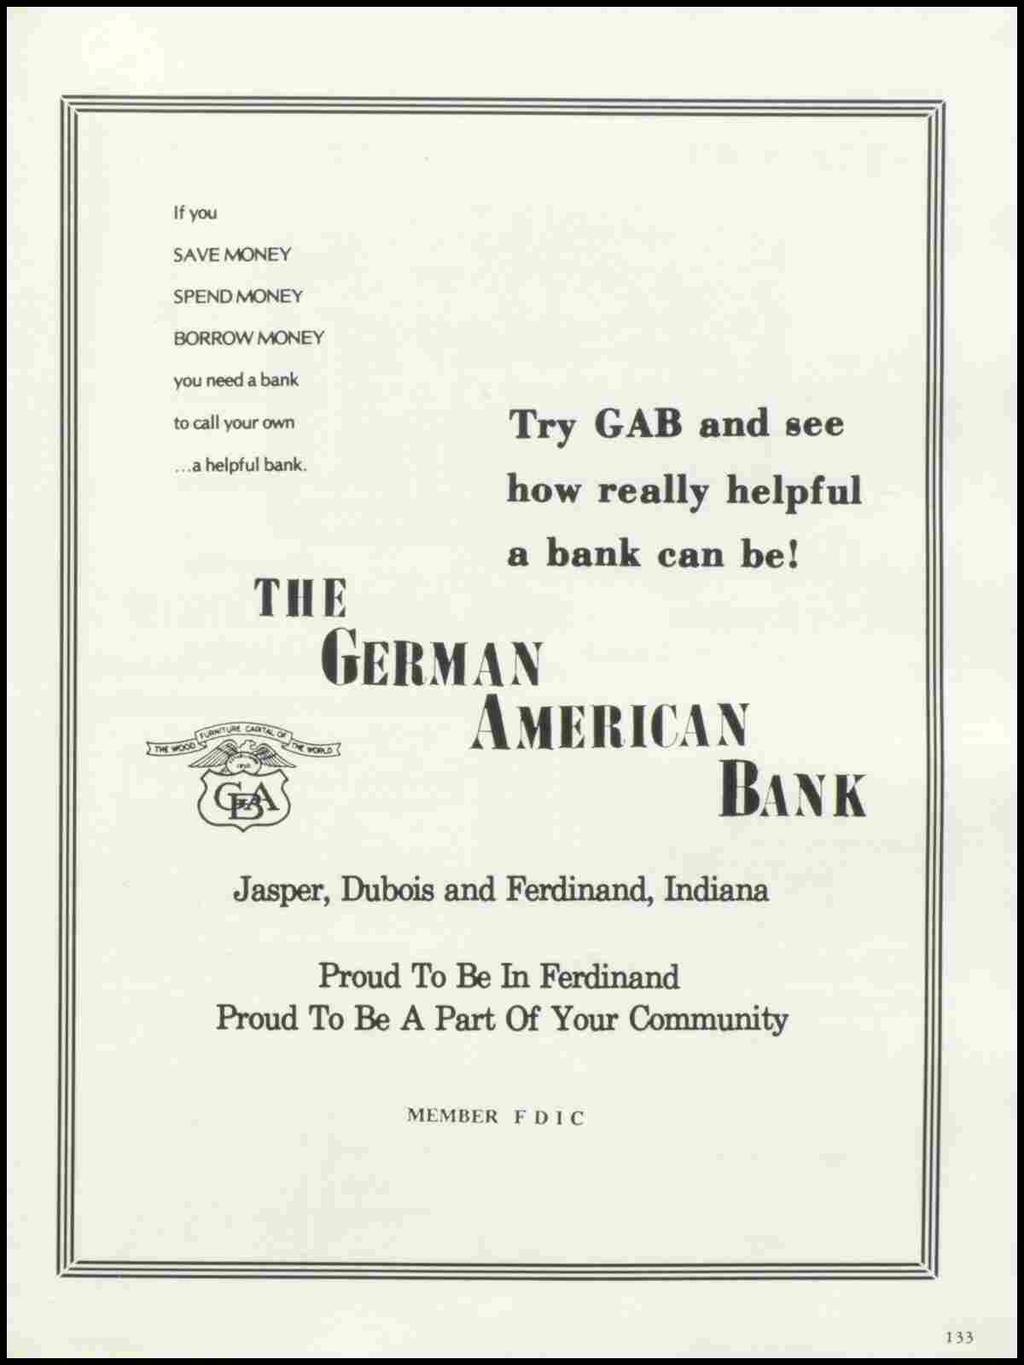 If you SAVE~EY SPEND MONEY BORROW~EY you need a bank to call your own... a helpful bank. THE Try GAB and see how really helpful a bank can be!